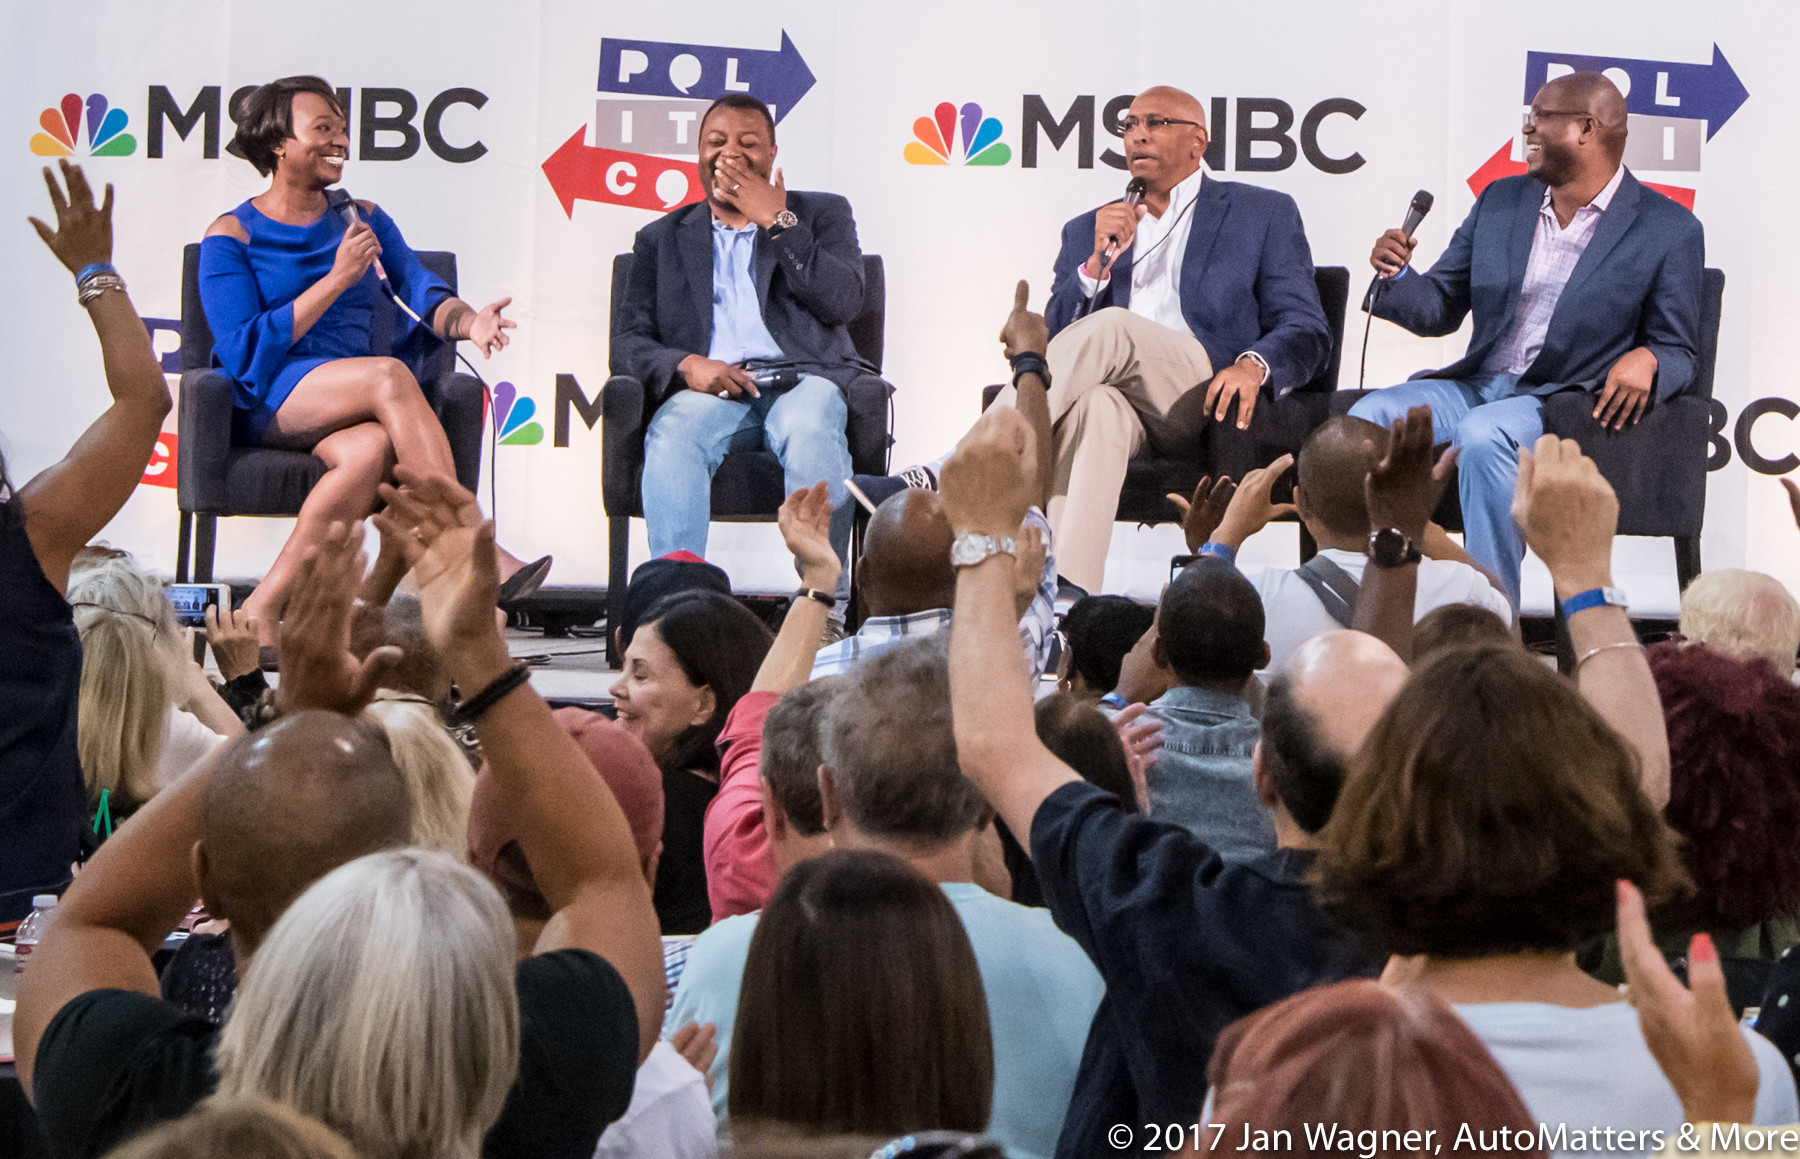 Joy Reid, Krystal Ball, Malcolm Nance & Michael Steele with their appreciative and enthusiastic audience.